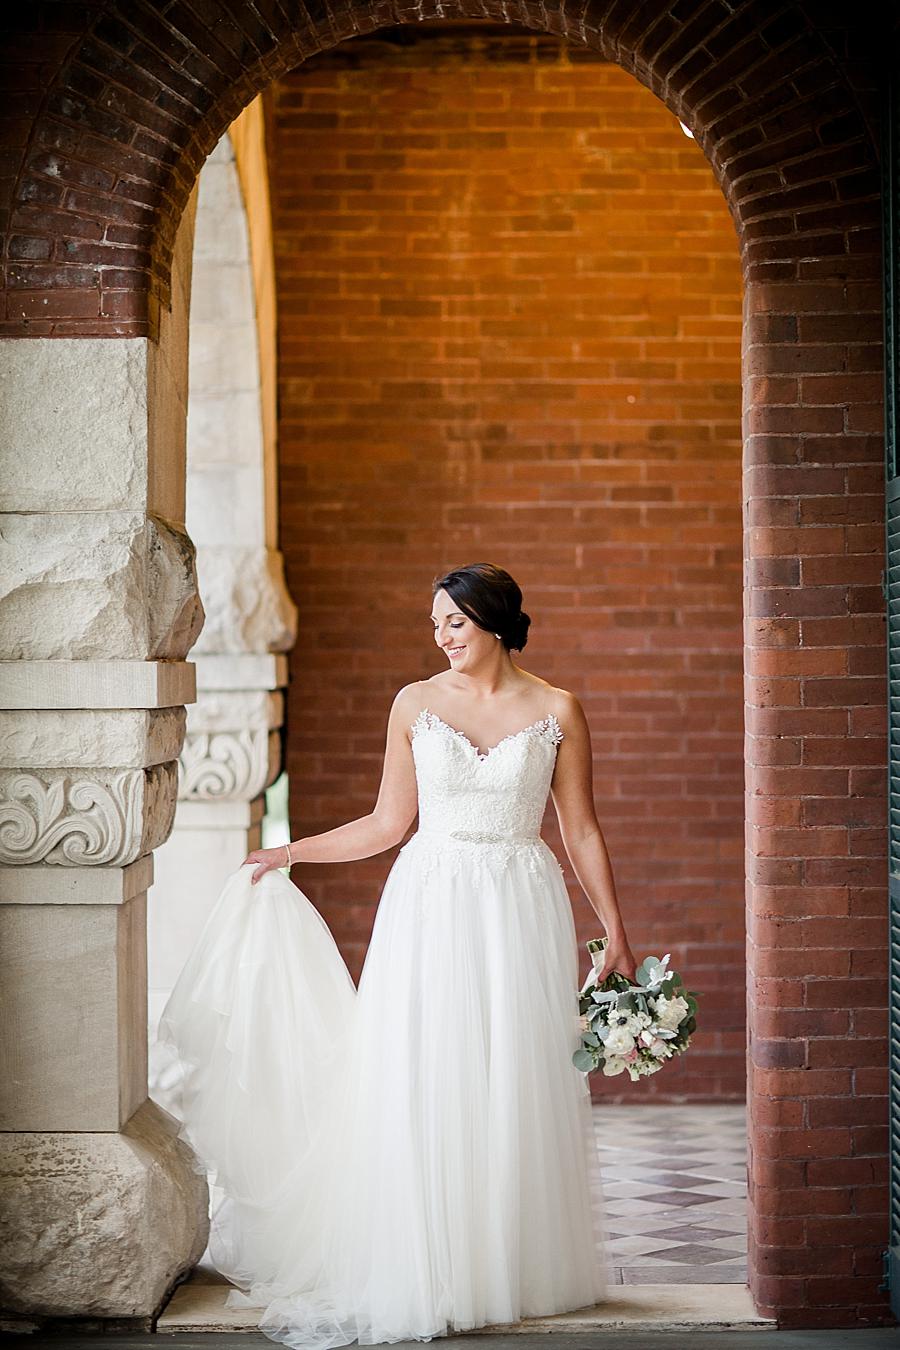 Under the arch at this Historic Westwood Bridal Session by Knoxville Wedding Photographer, Amanda May Photos.